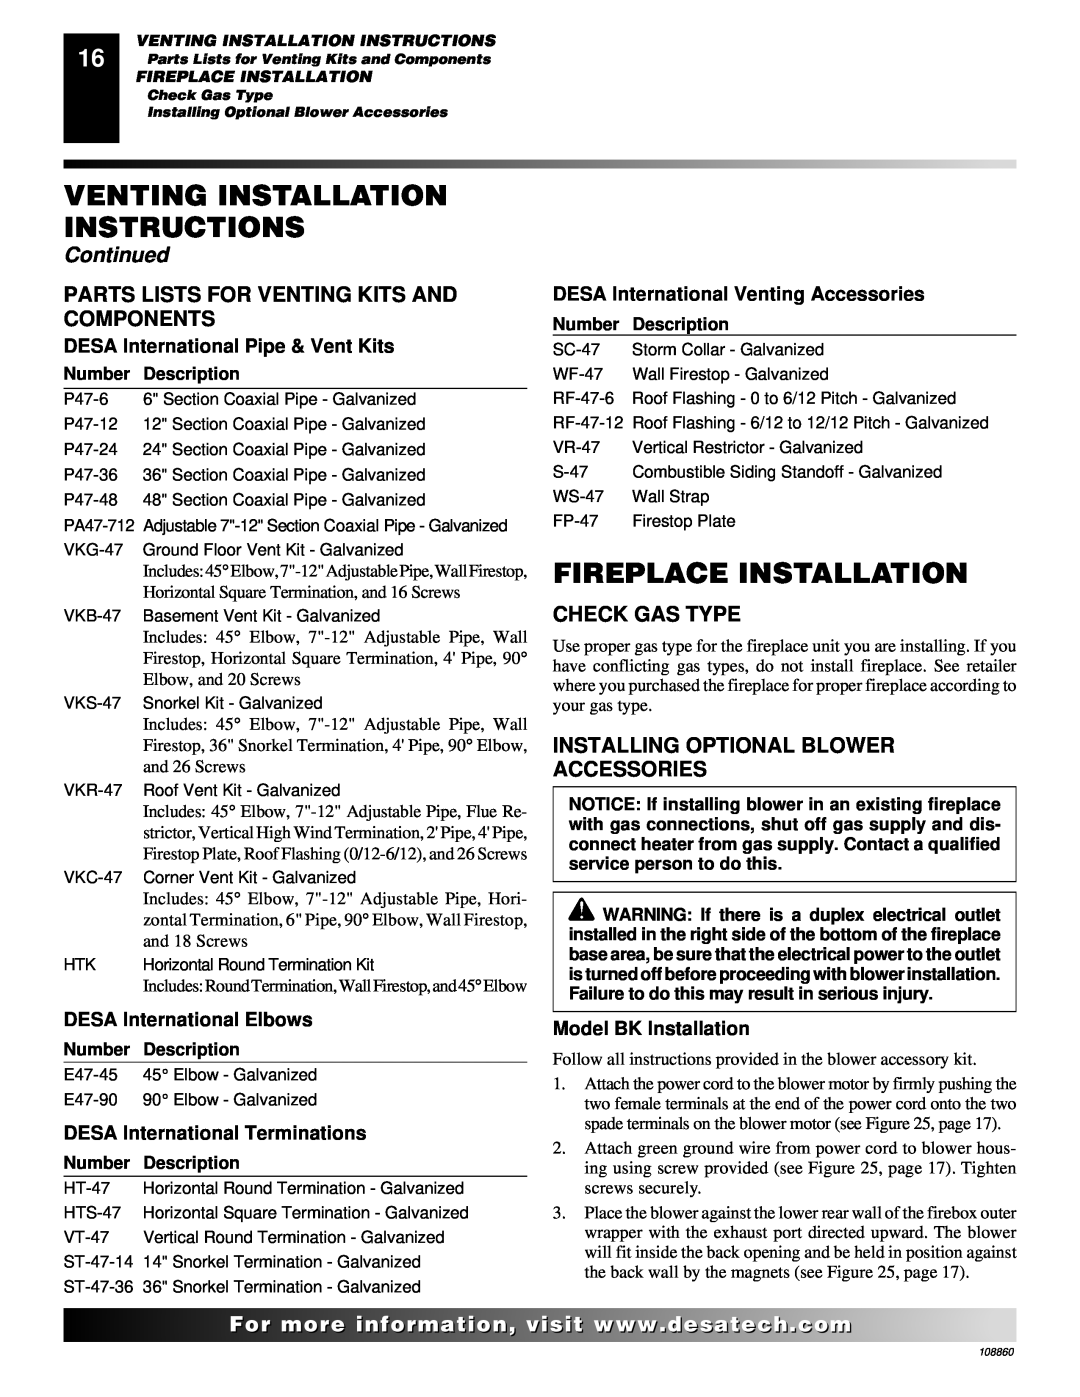 Desa (V)T32EP Fireplace Installation, Venting Installation Instructions, Continued, DESA International Pipe & Vent Kits 